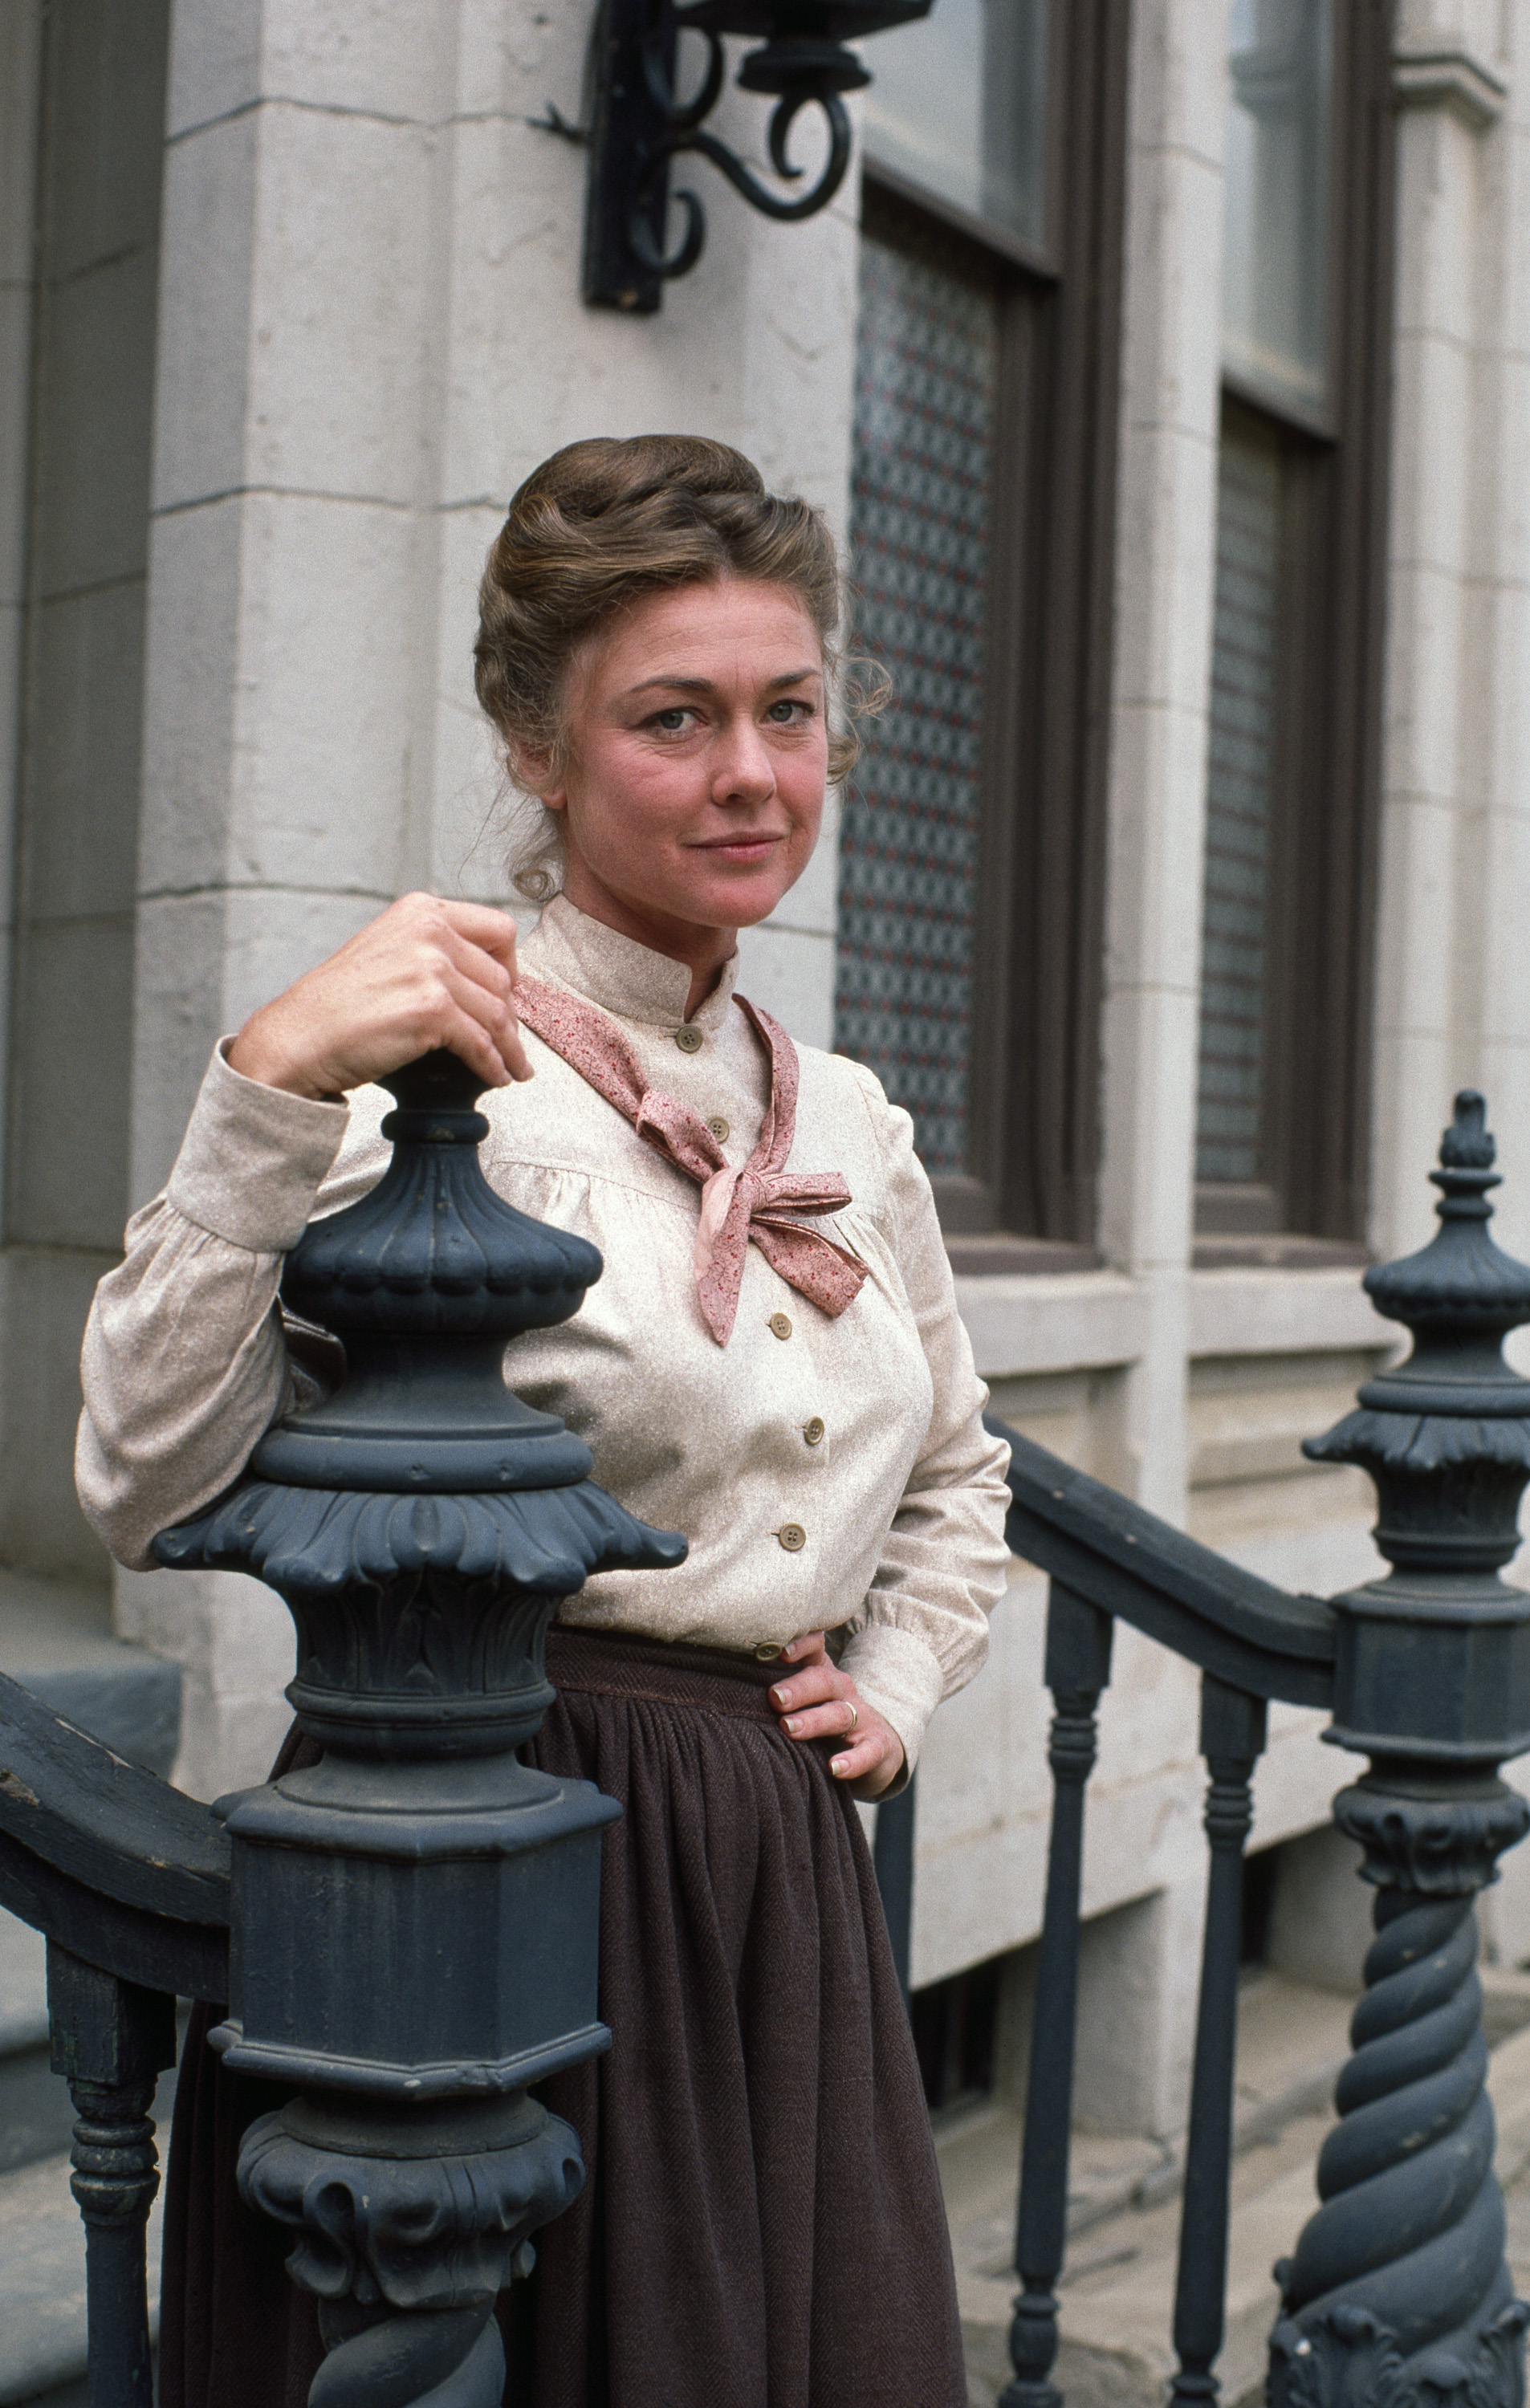 Hersha Parady als Alice Garvey in "Little House on the Prairie" | Quelle: Getty Images